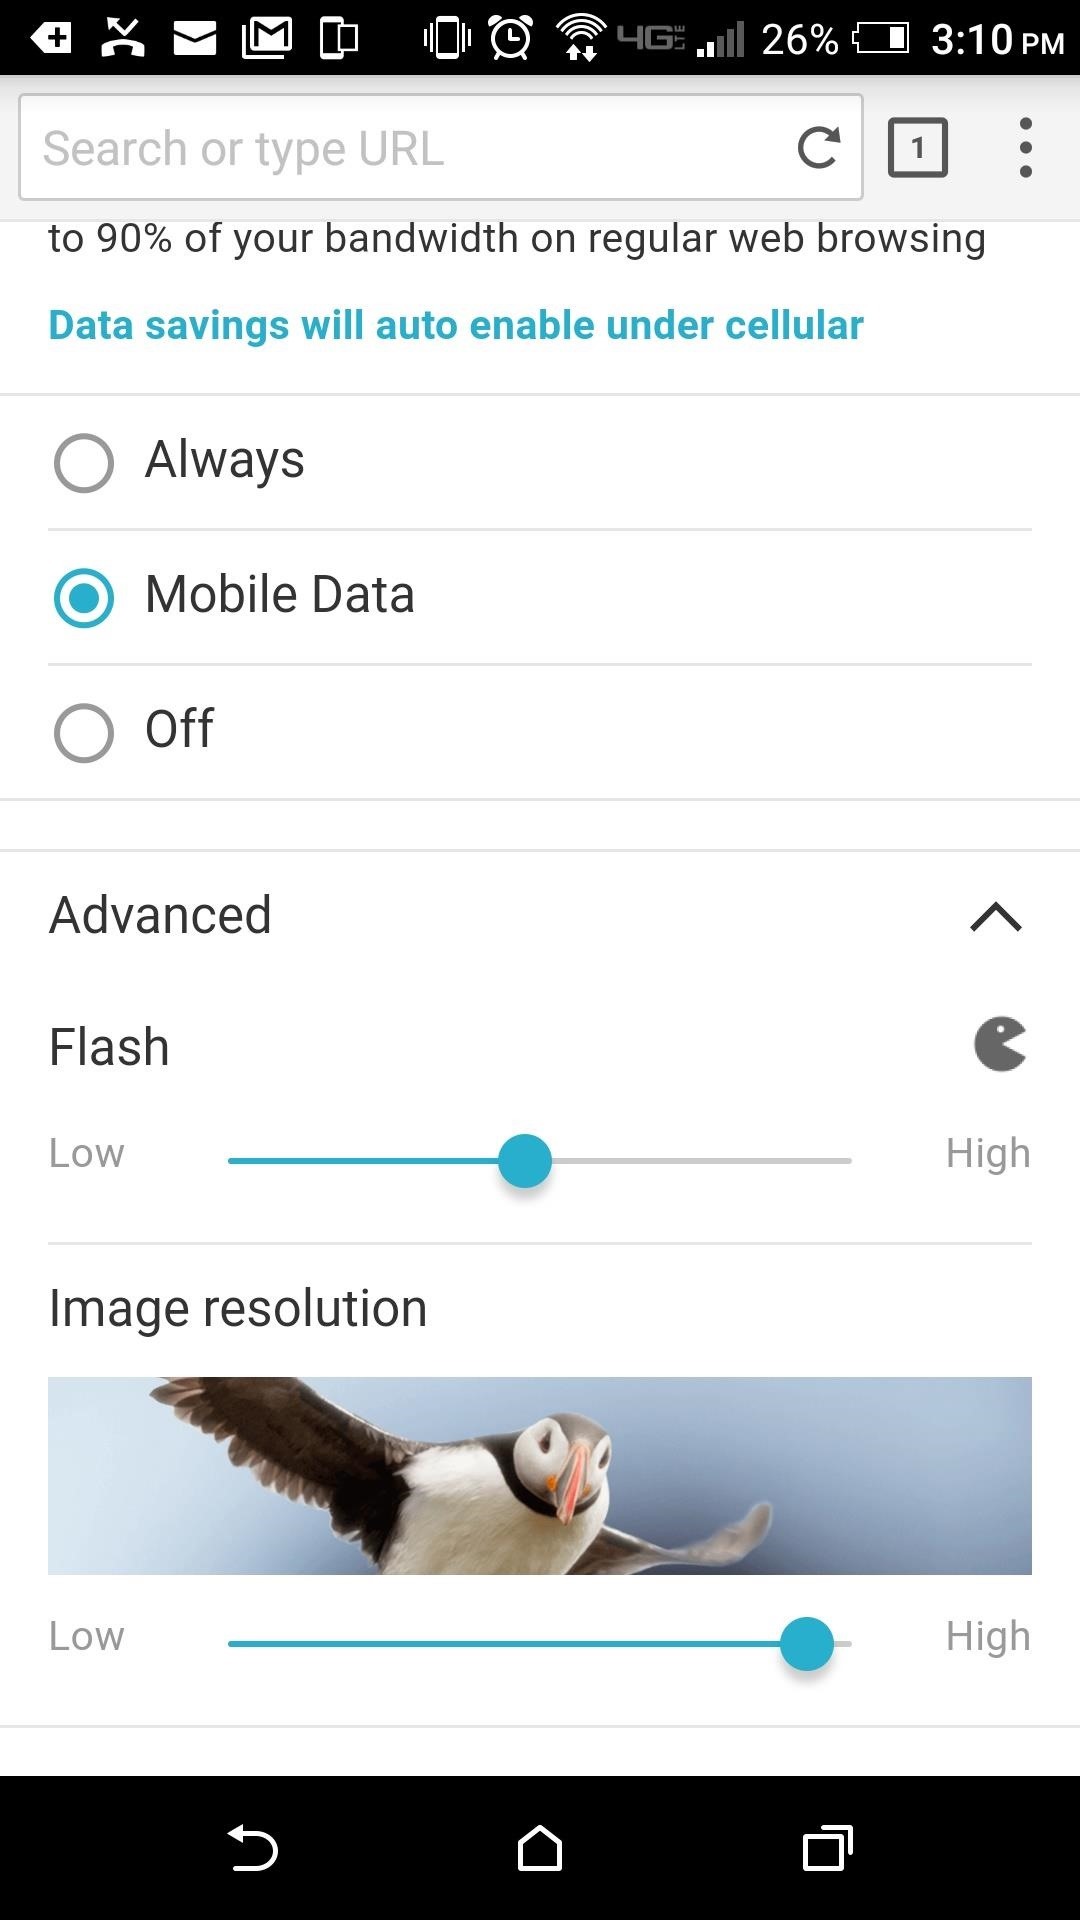 Use the Puffin Browser to Play Flash Games on Android Without Wasting Data